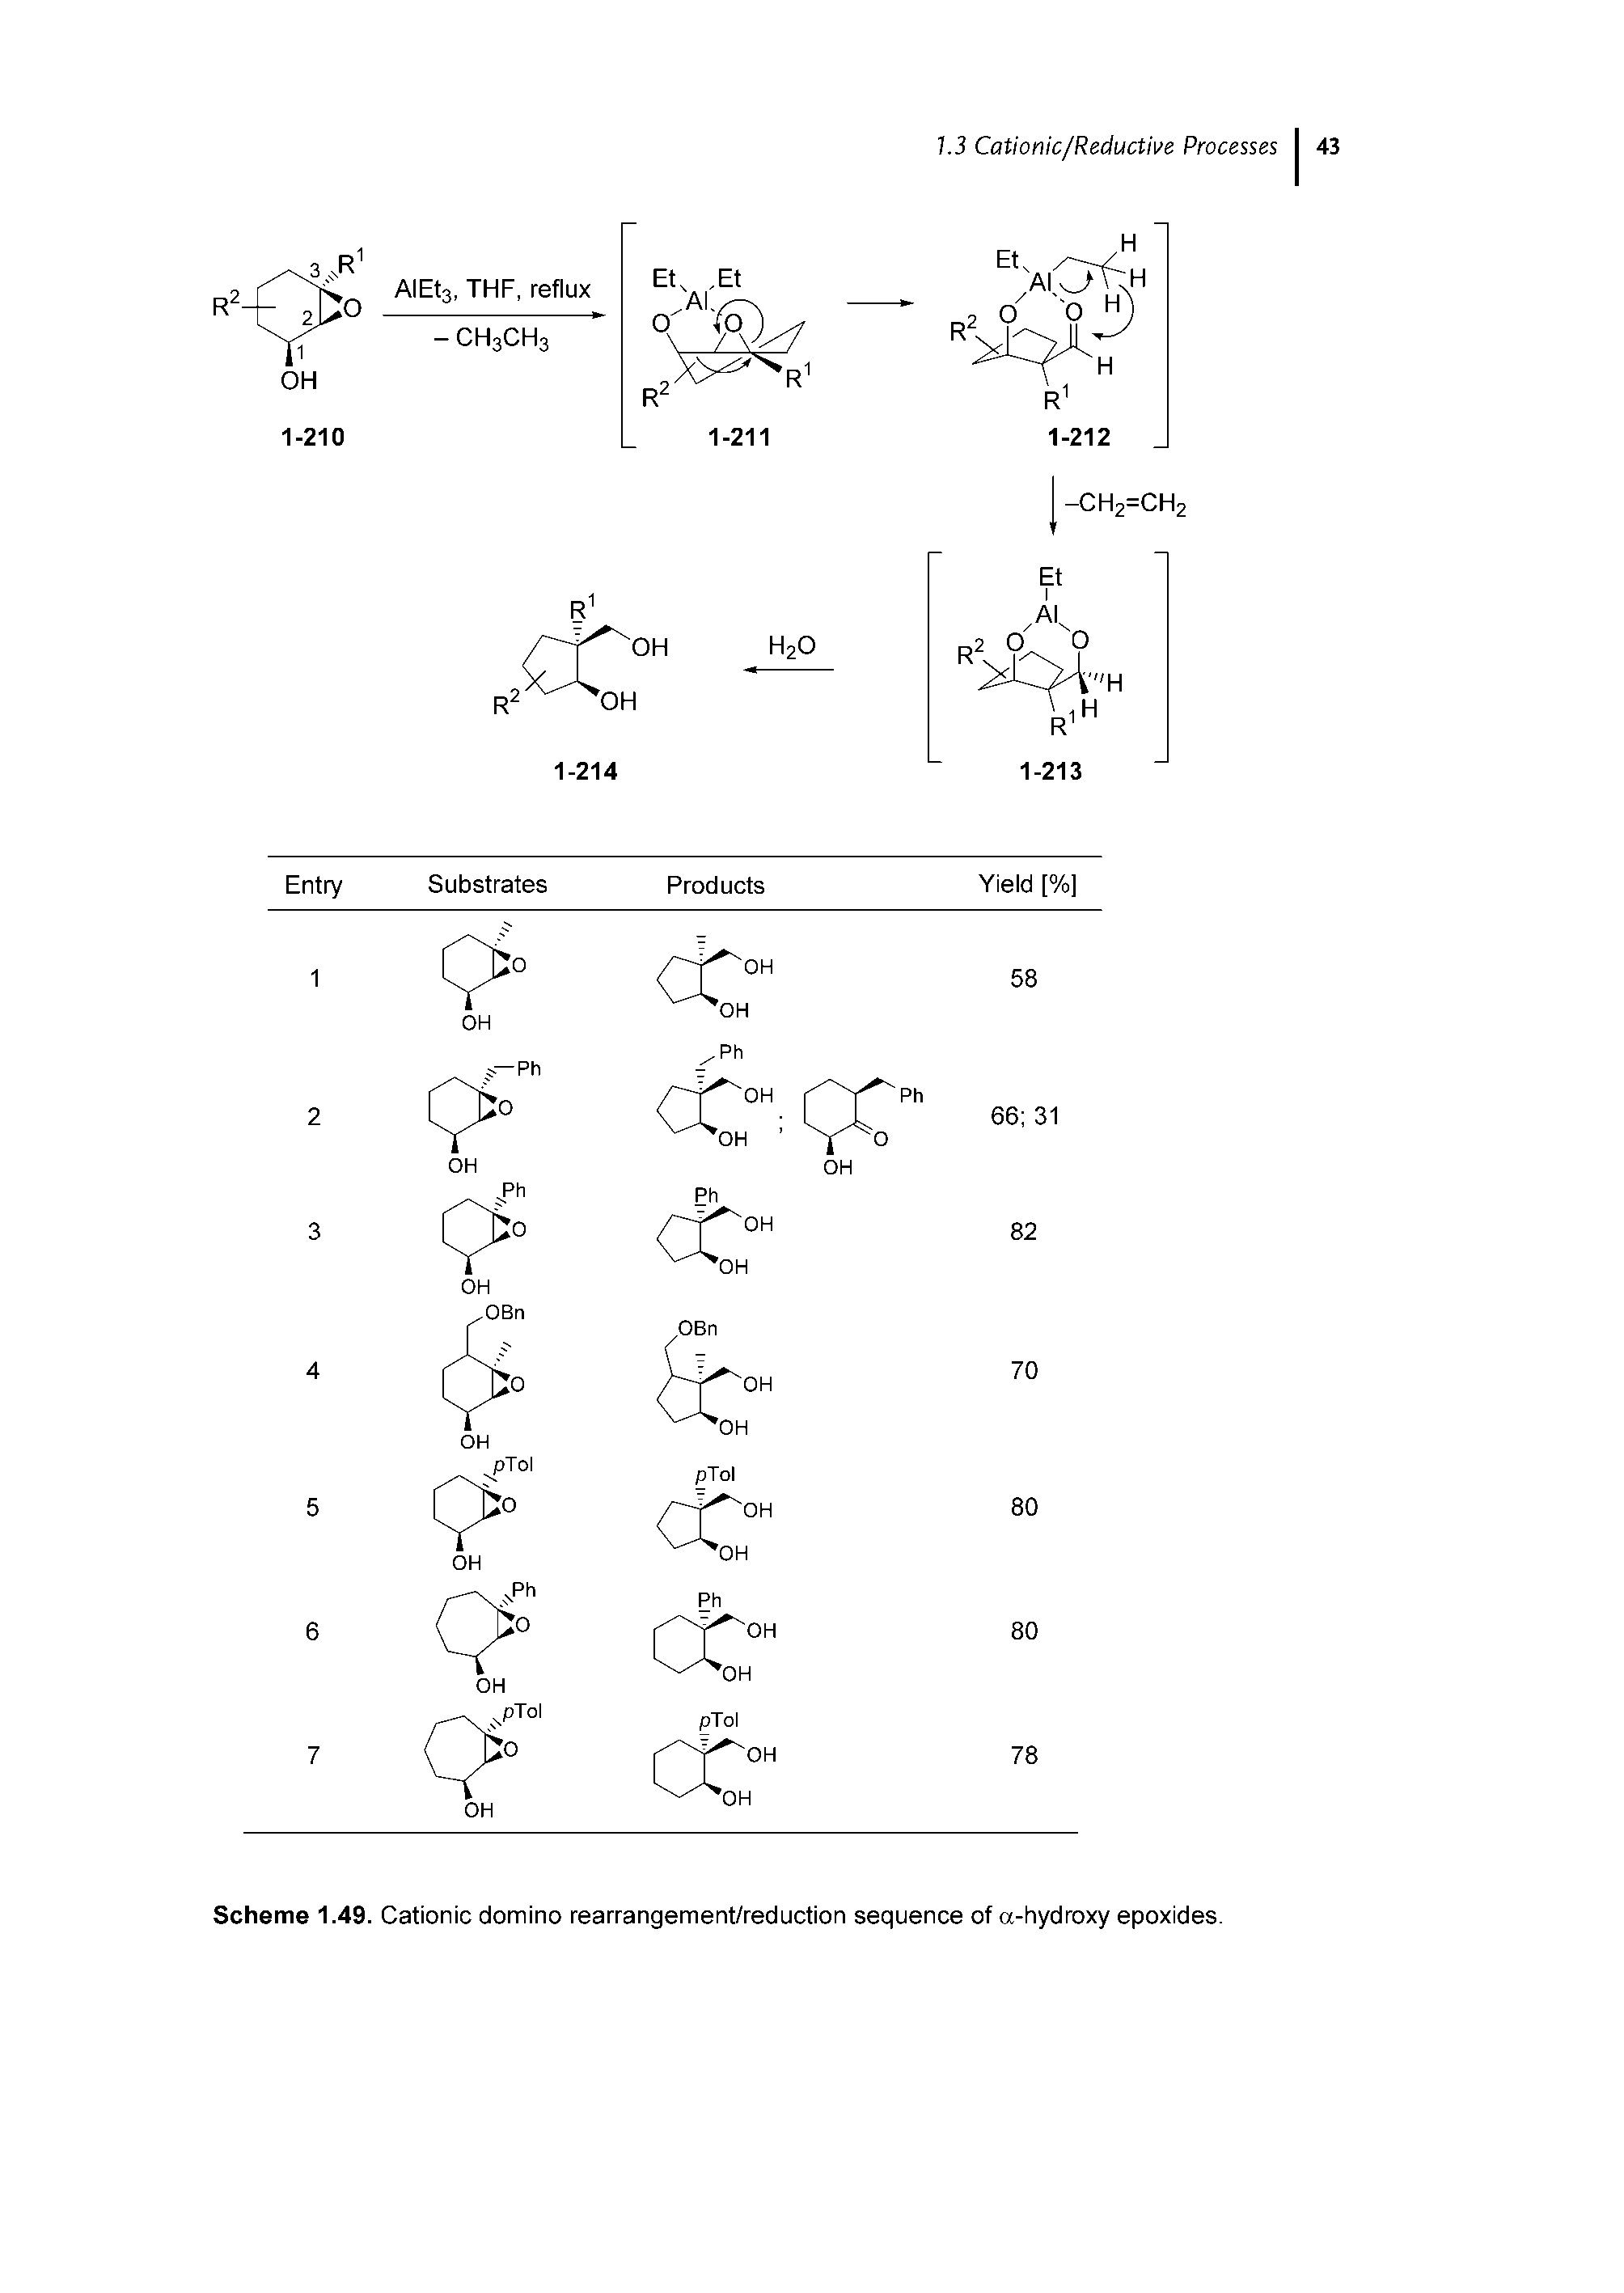 Scheme 1.49. Cationic domino rearrangement/reduction sequence of a-hydroxy epoxides.